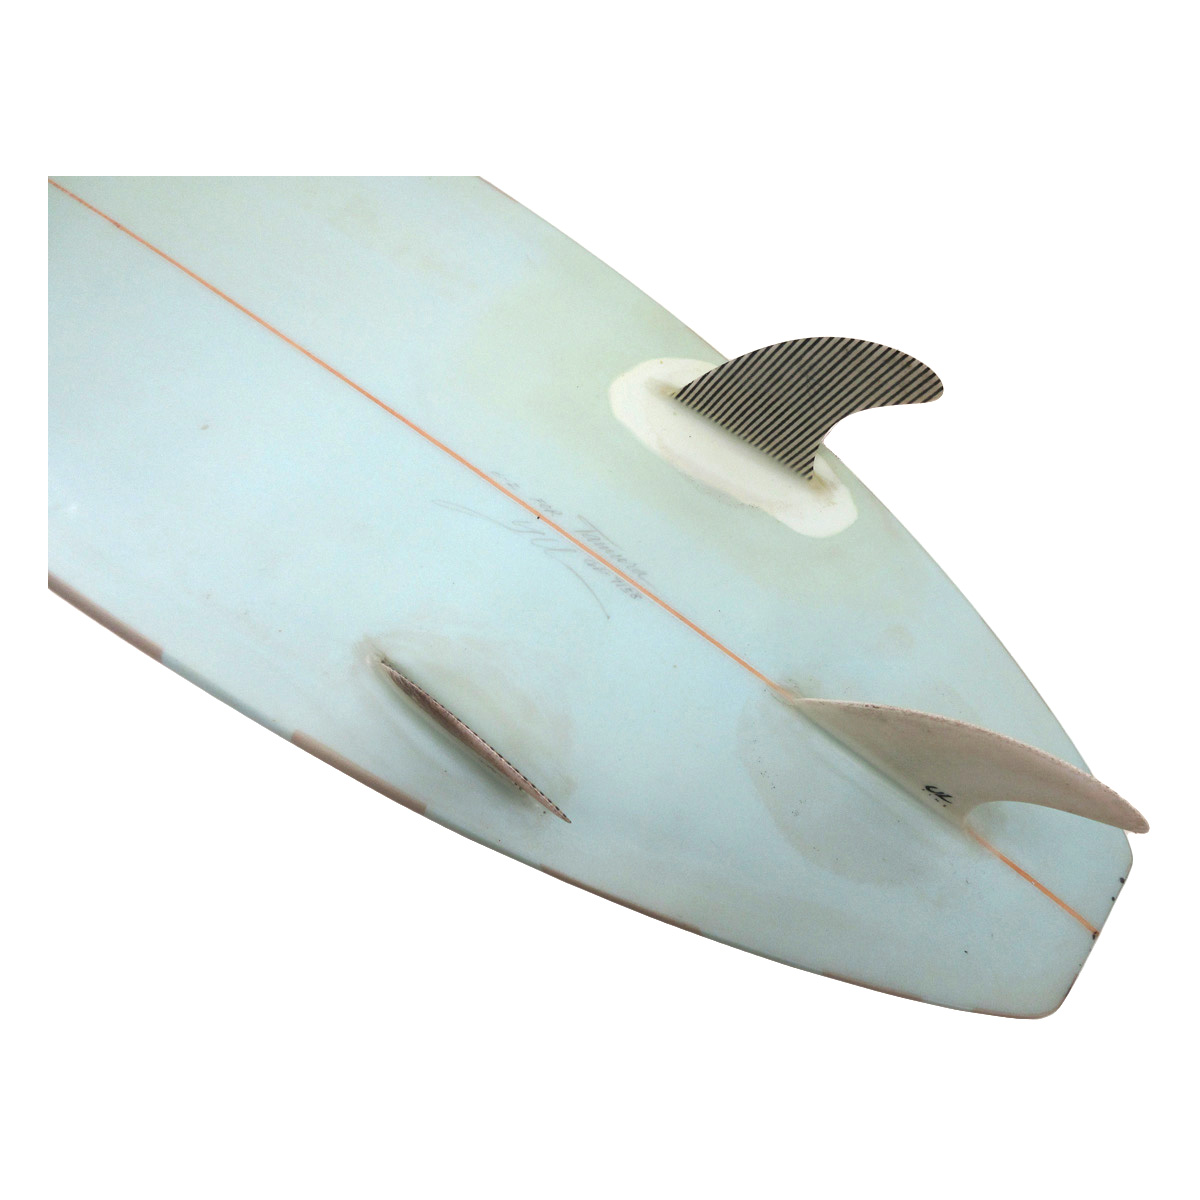 GERRY LOPEZ  / 6`3 Custom thruster Shaped by YU